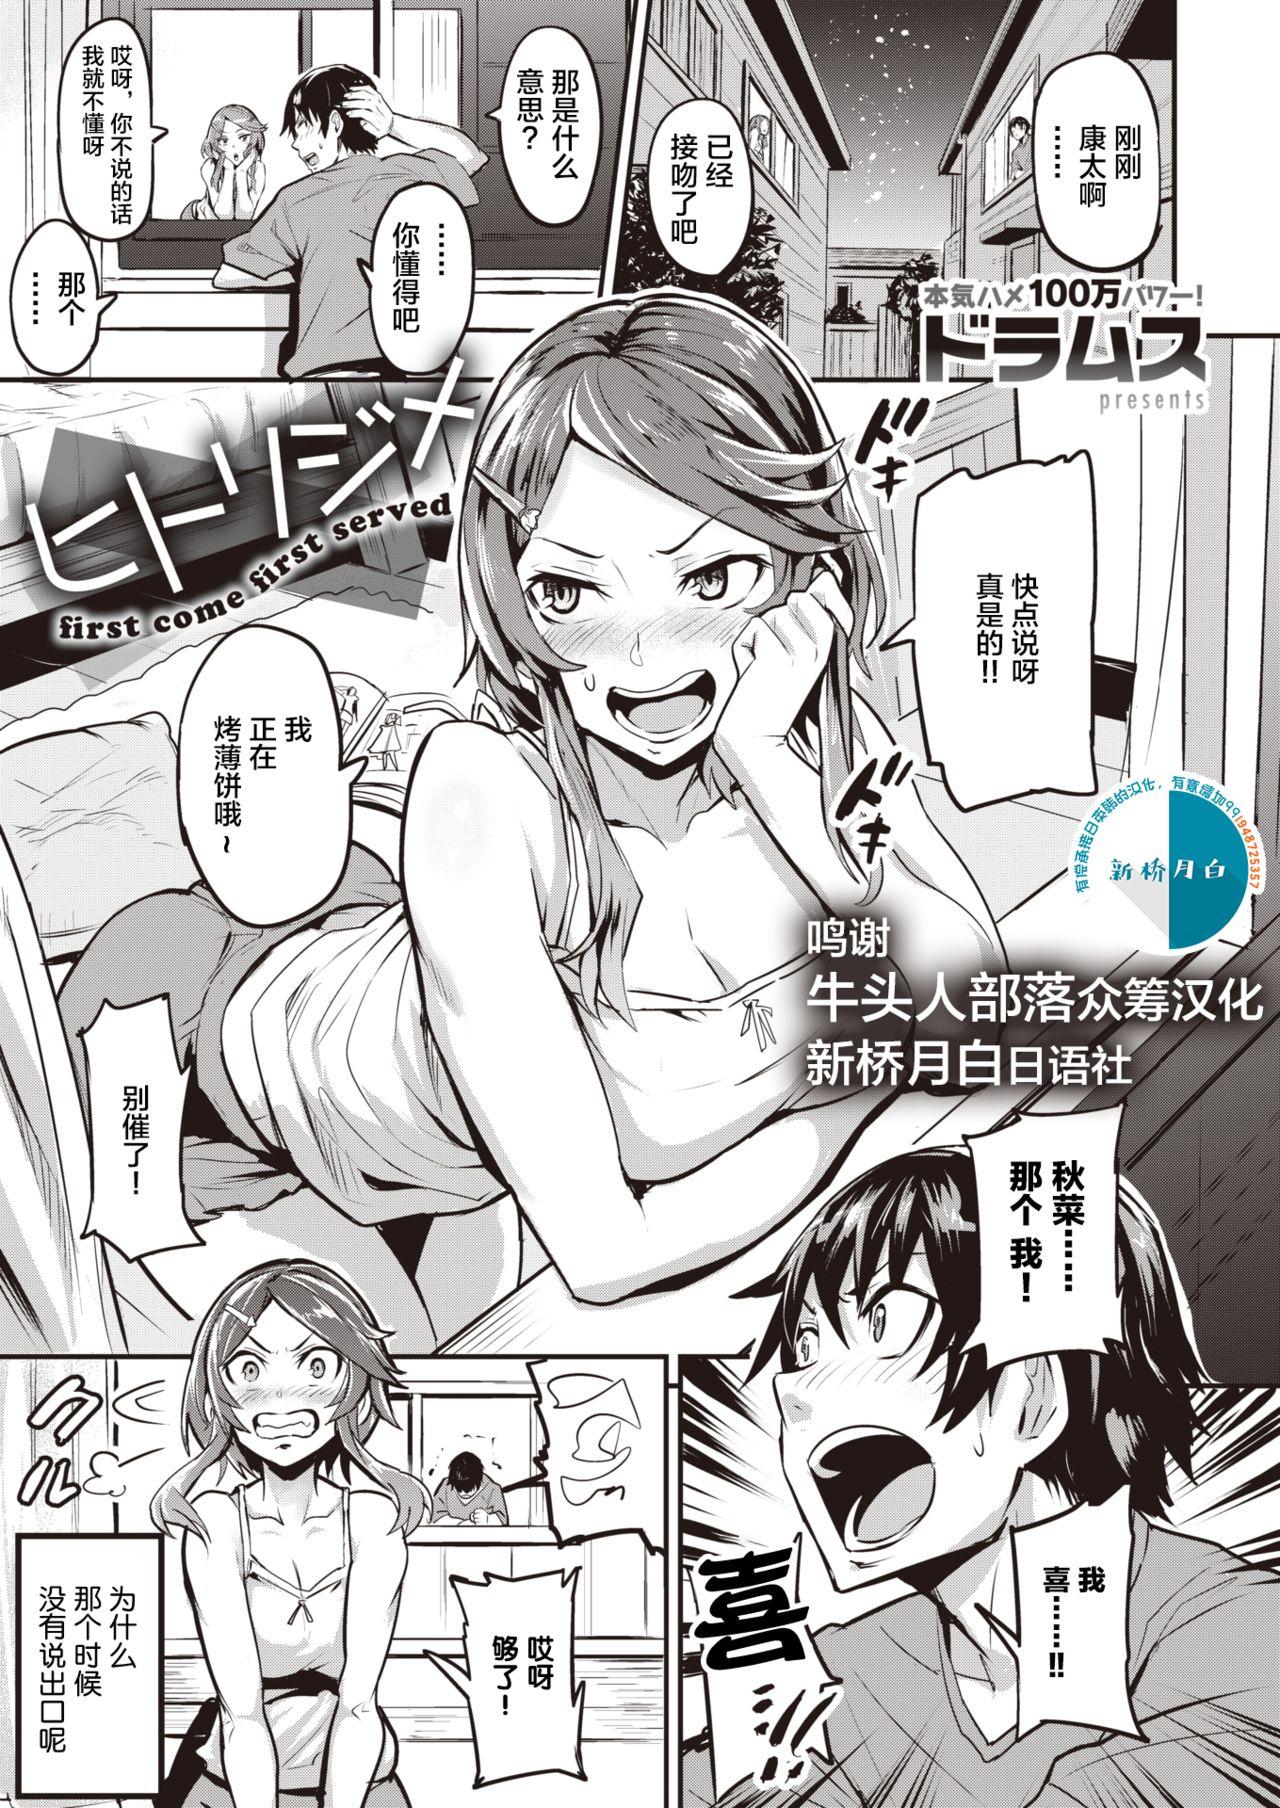 Perfect Butt [Dramus] Hitorijime - first come first served Ch. 1-3 [Chinese] [牛头人部落×新桥月白日语社] Calcinha - Page 1